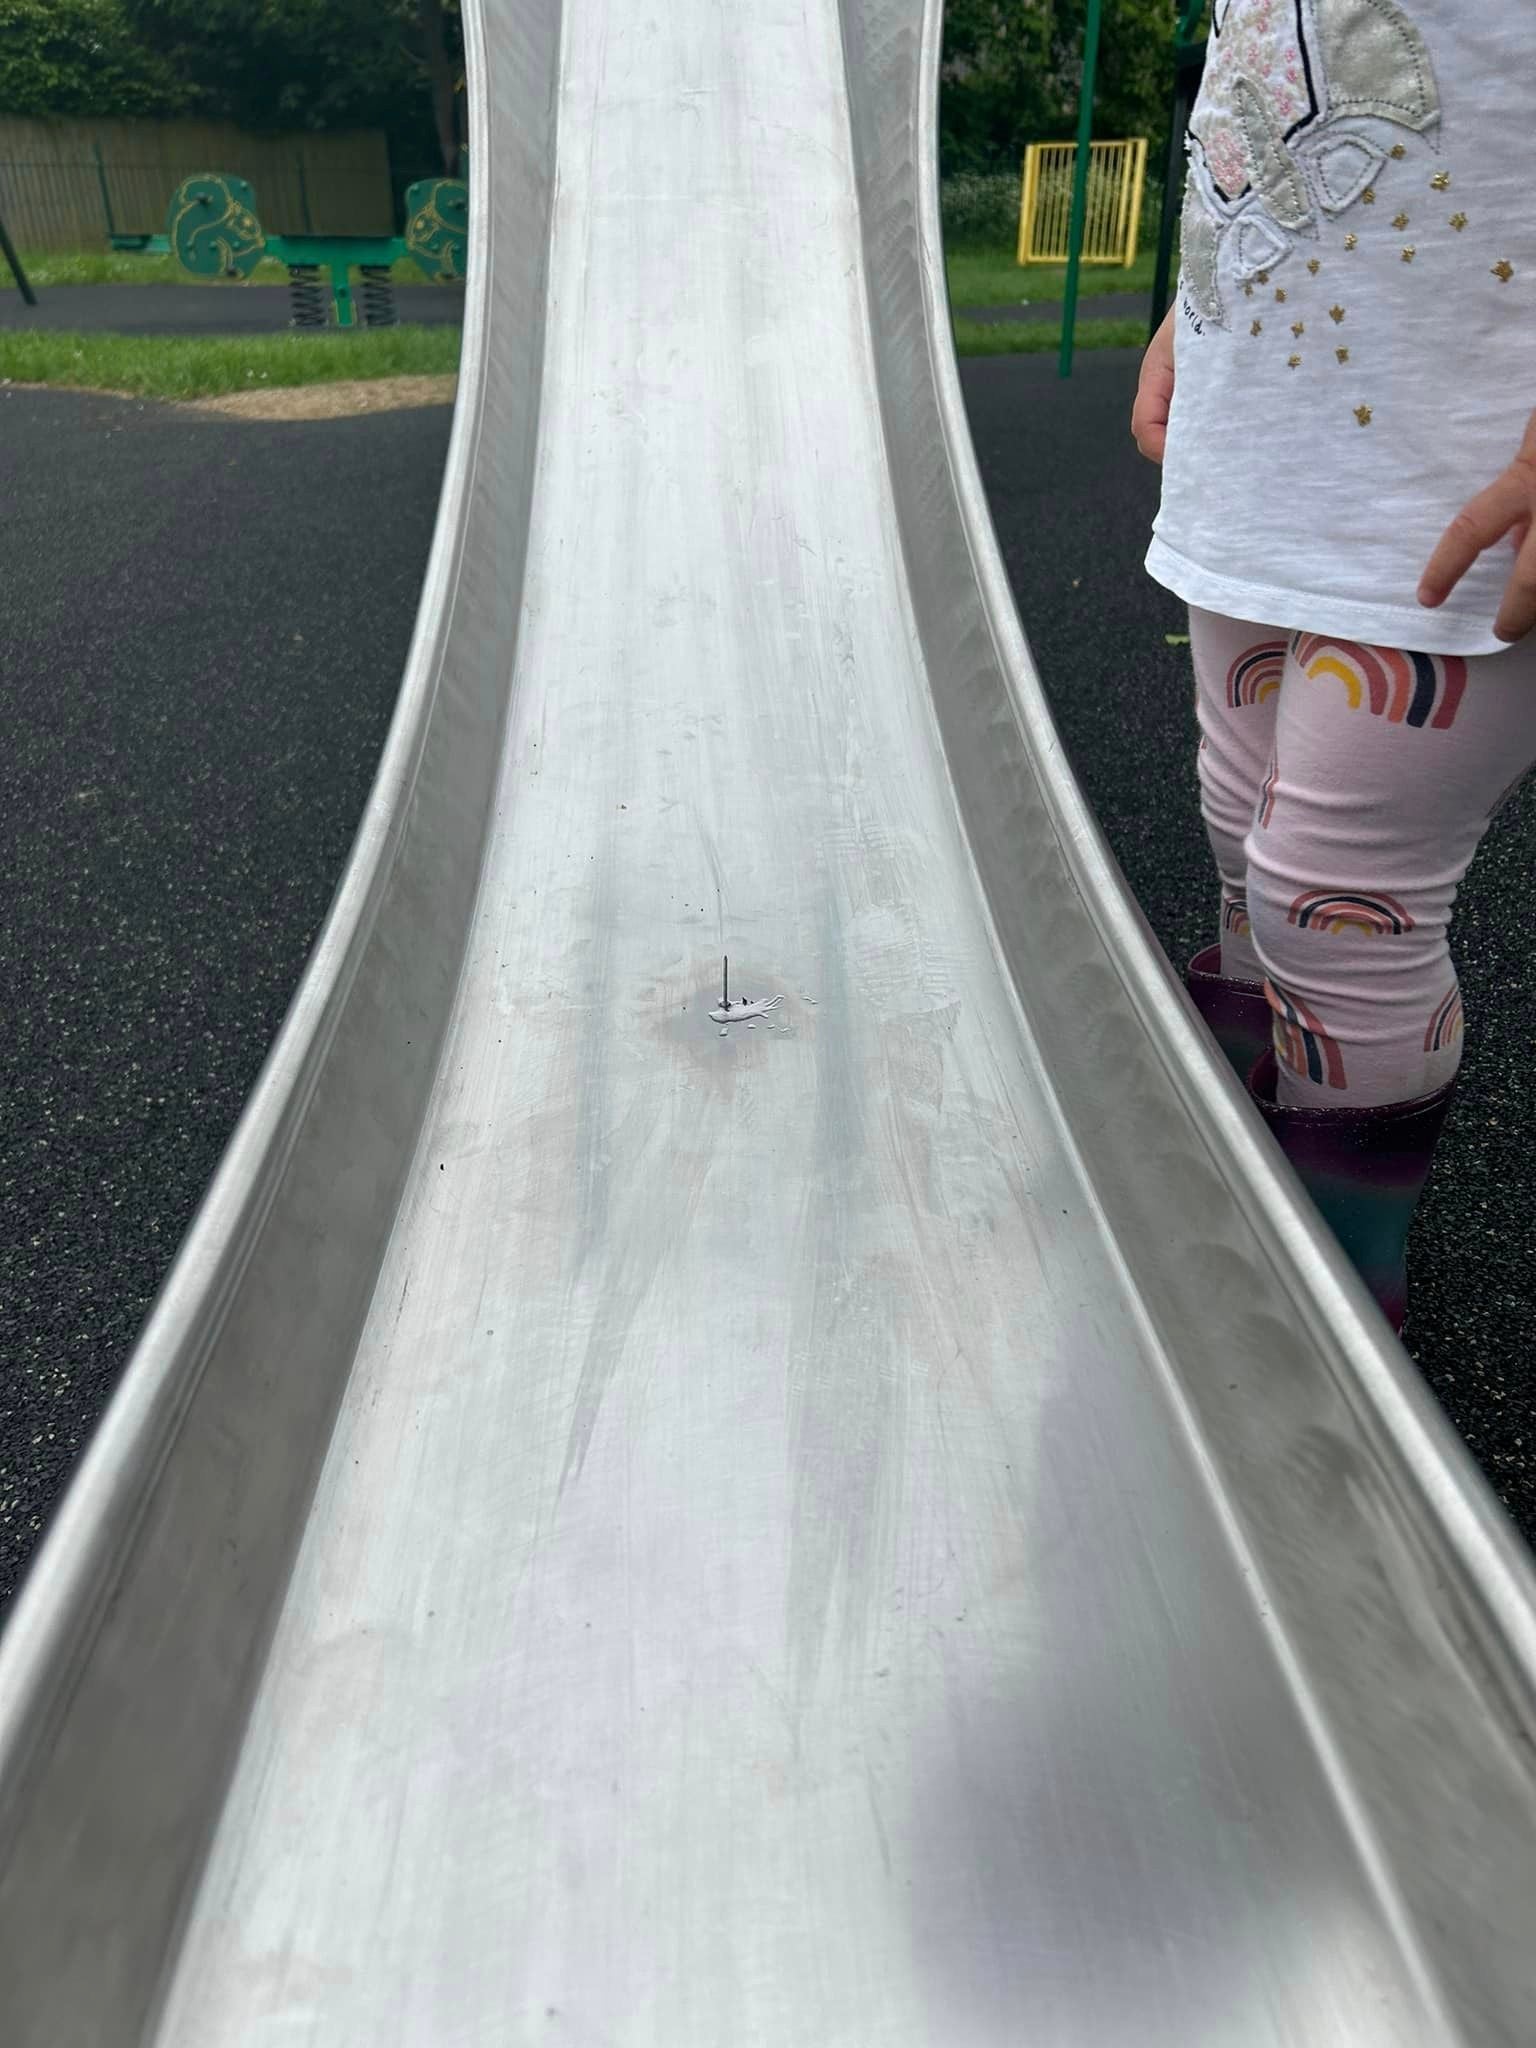 A nail glued to the village slide